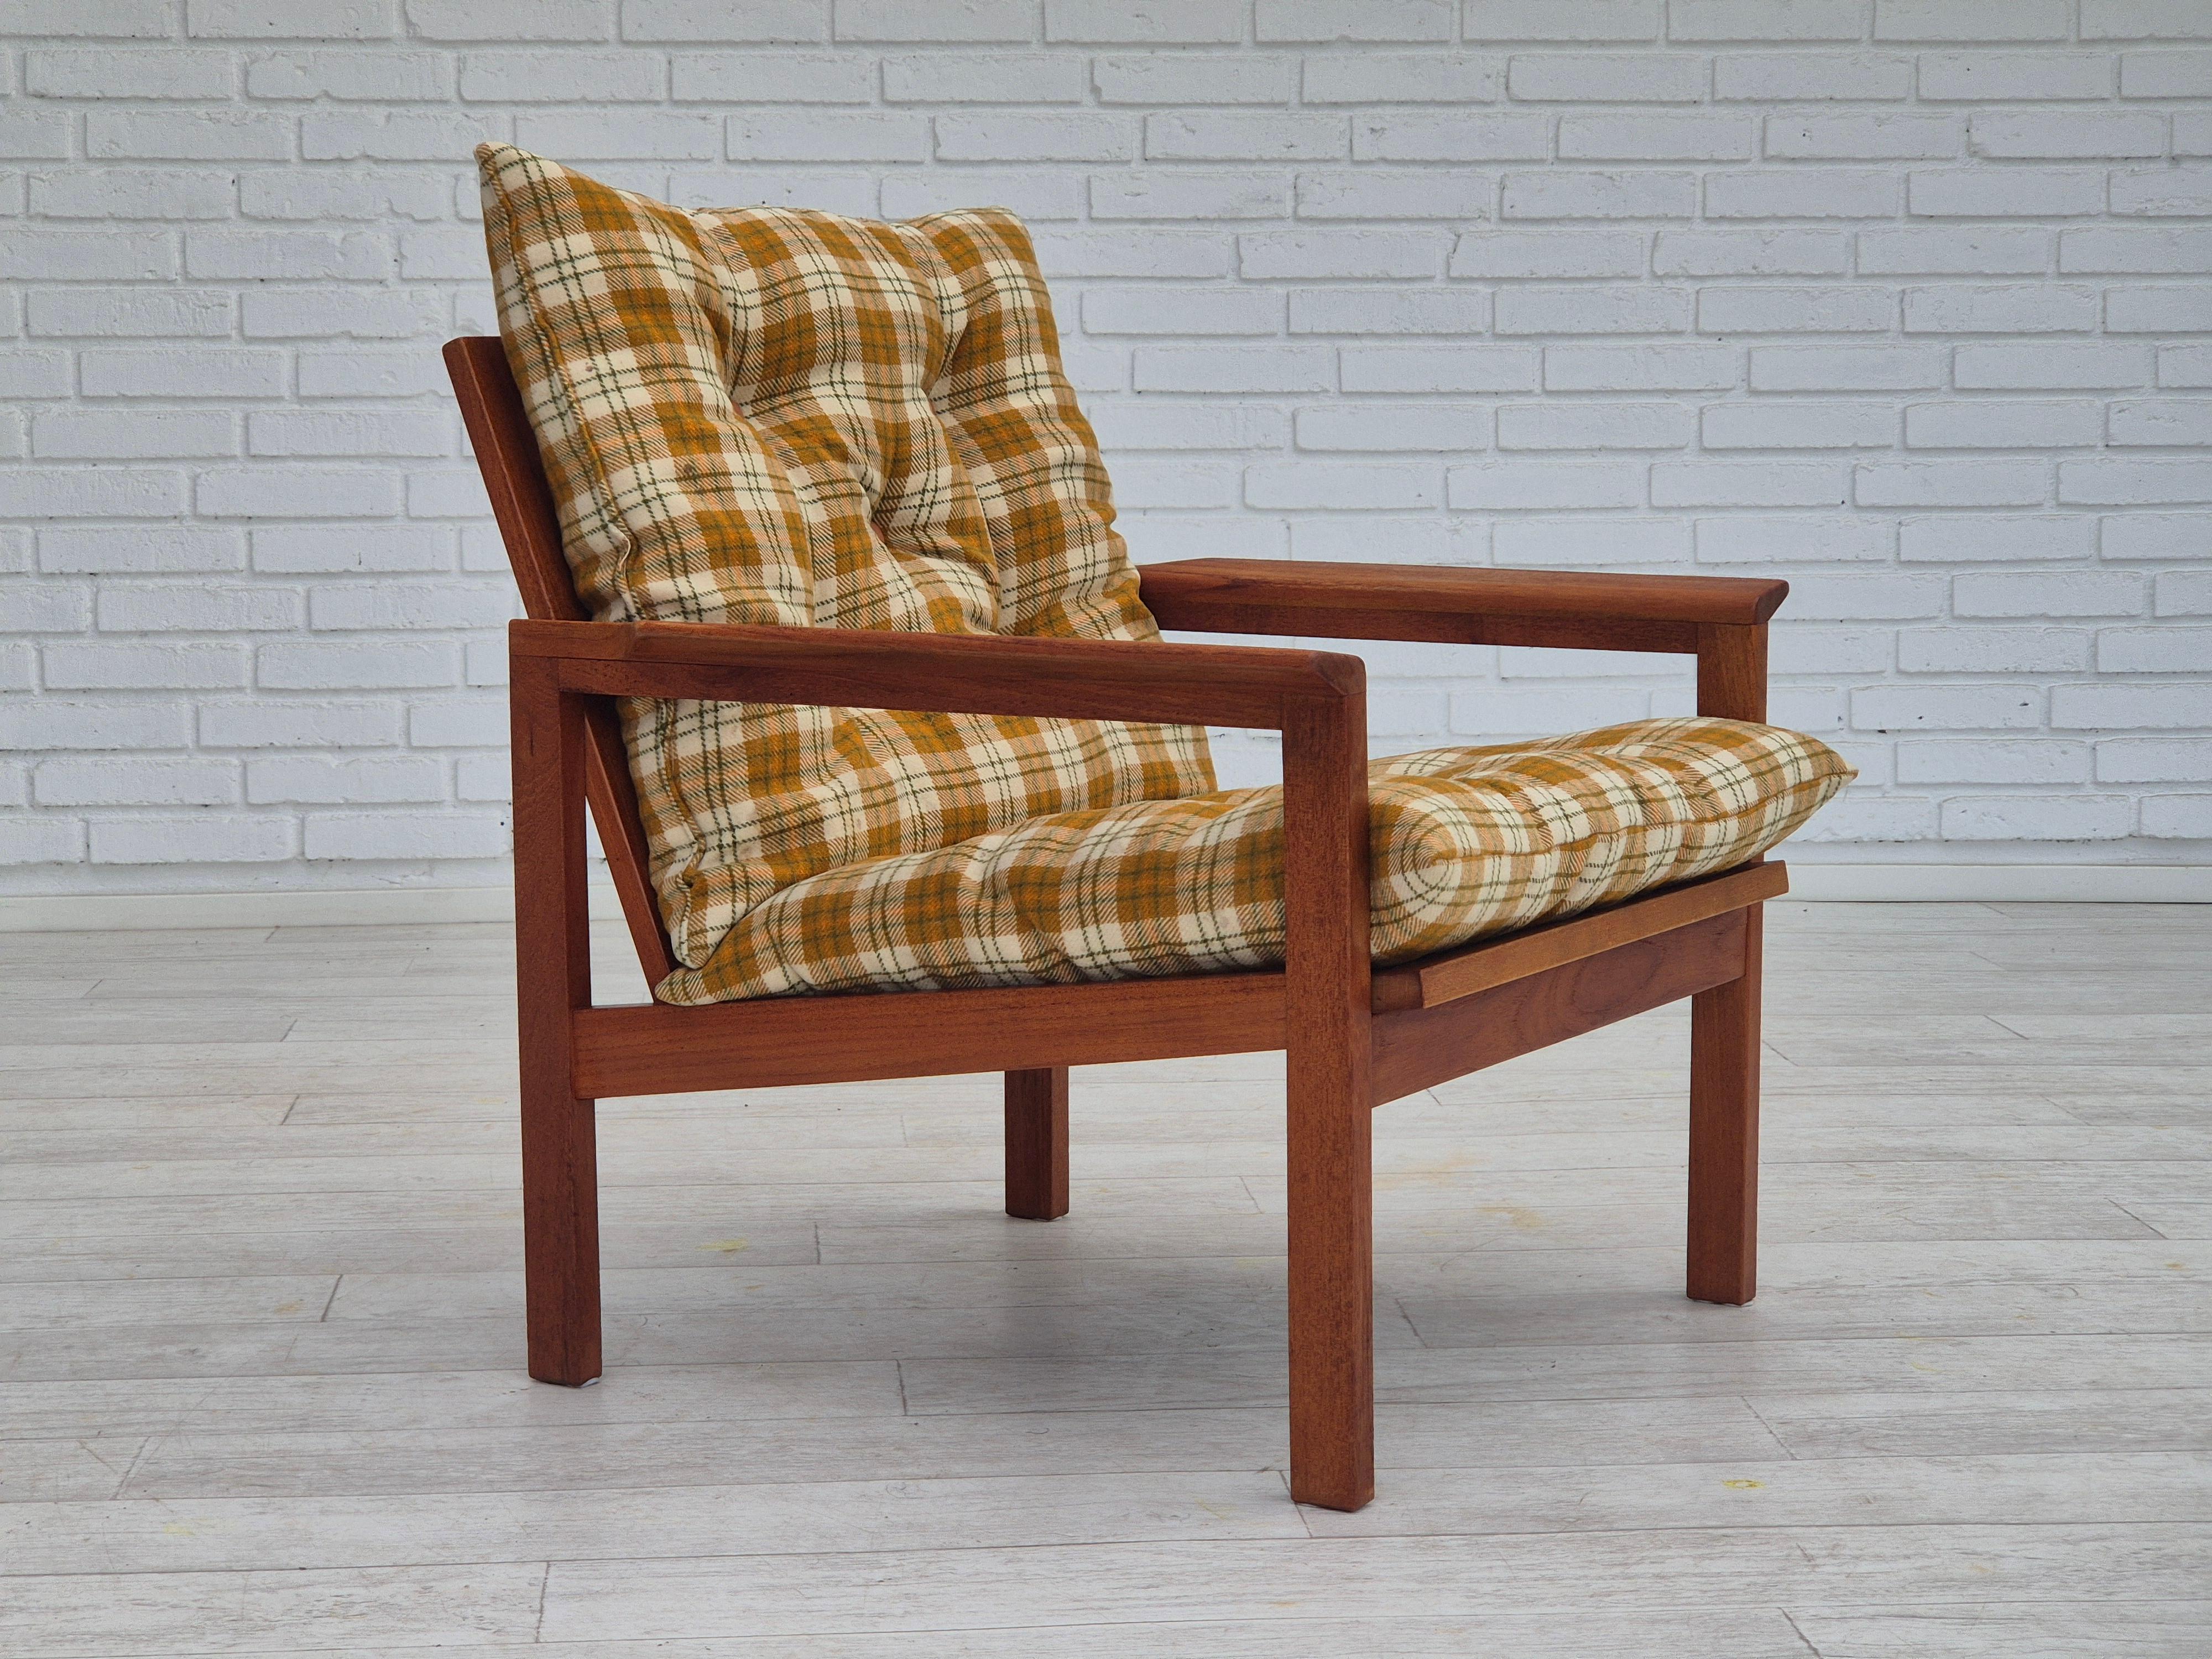 1970s, Danish lounge chair in original very good condition: no smells and no stains. Multicolor furniture wool fabric, teak wood. Light brown leather buttons. Wood construction renewed. Manufactured by Danish furniture manufacturer in about 1970s.